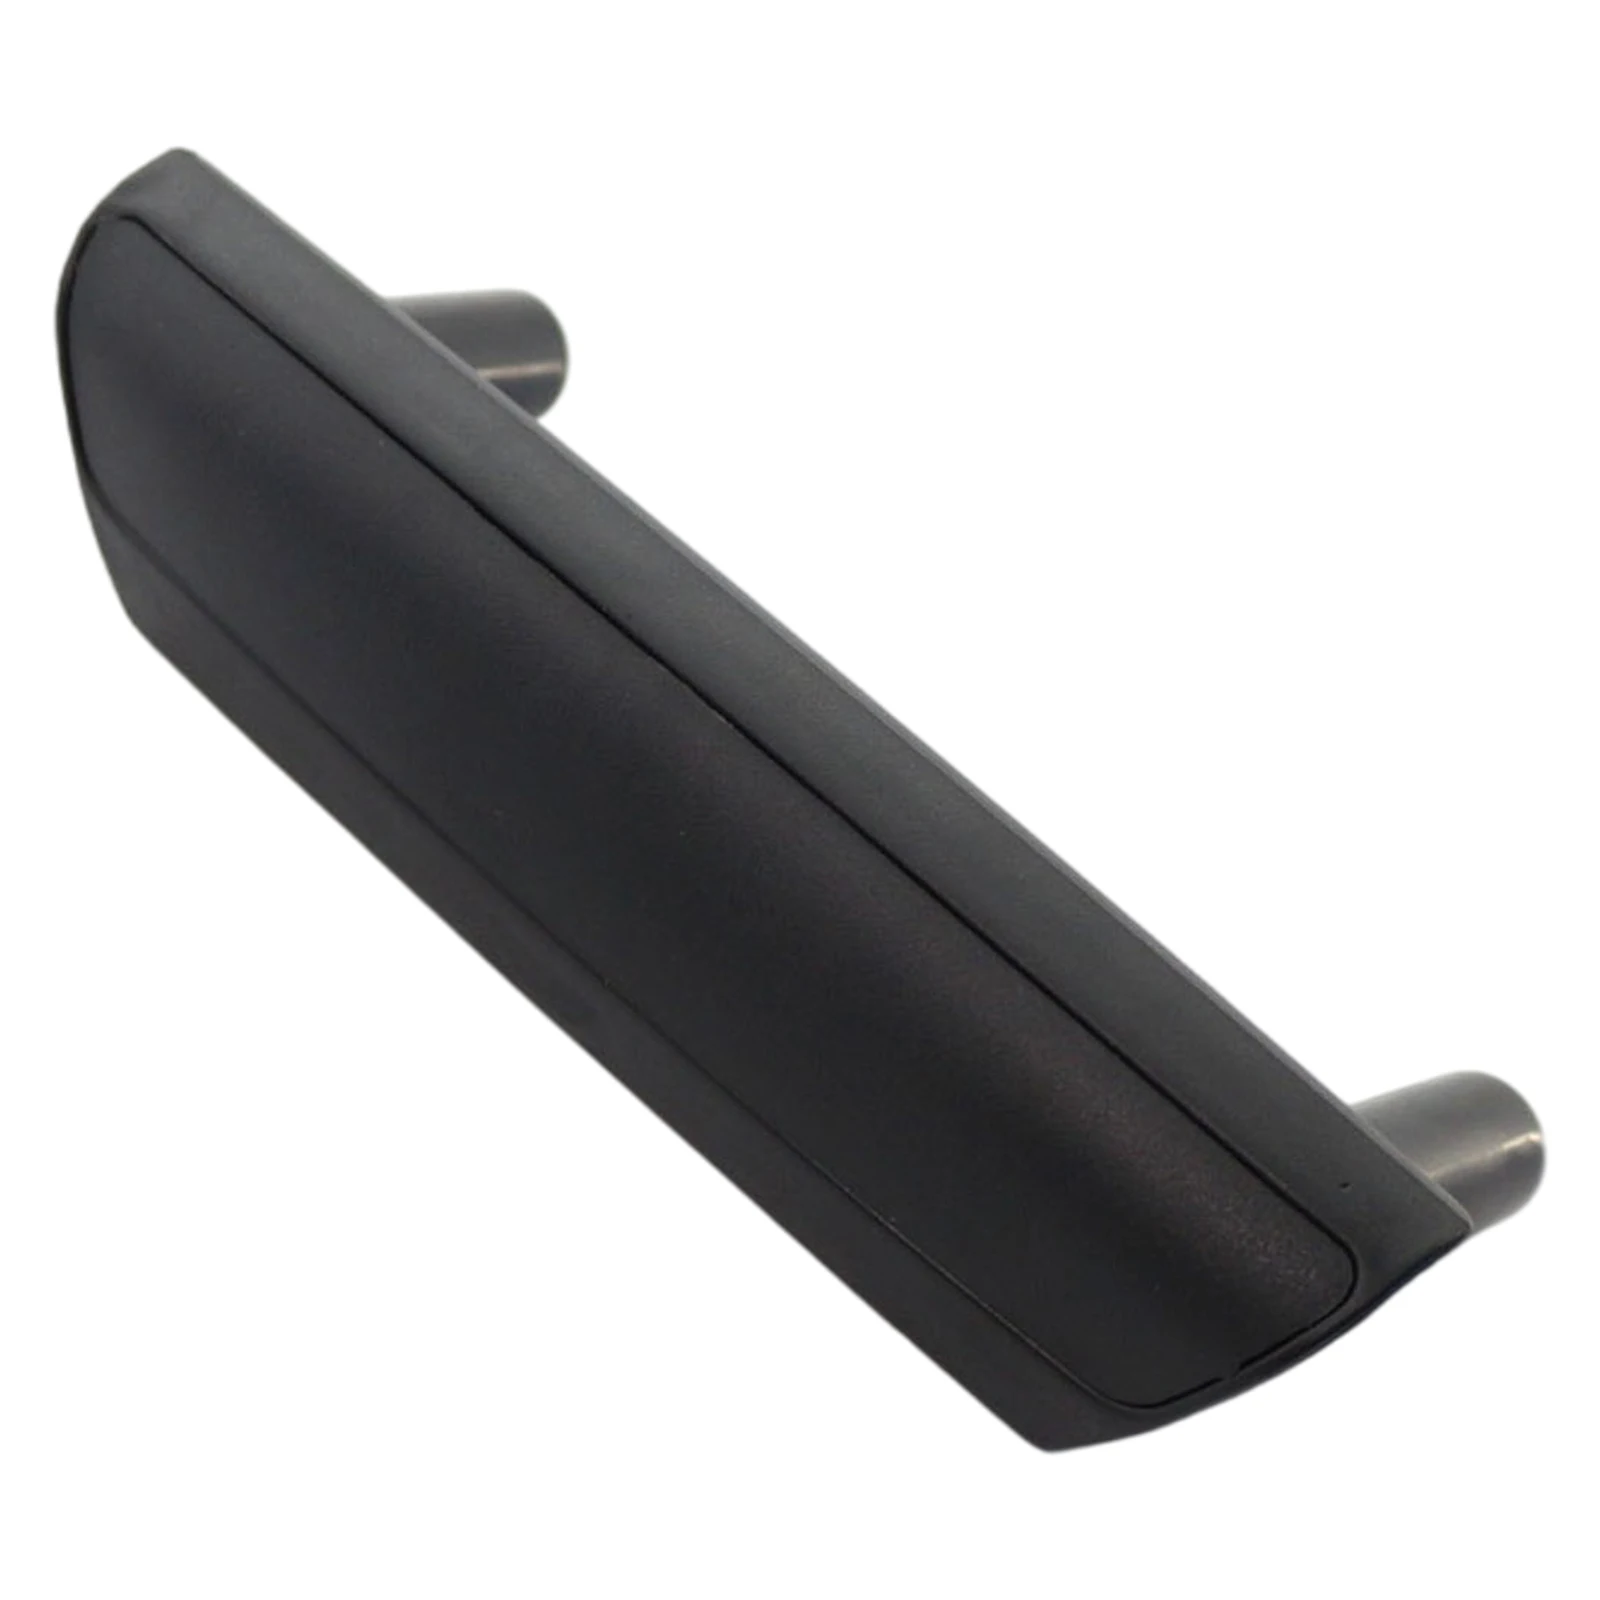 Plastic Interior Door Handle, 7H0 867 179 7H0 867 180 Fit for Transporter T5 2003+ Replace Parts Accessories Easy to Install